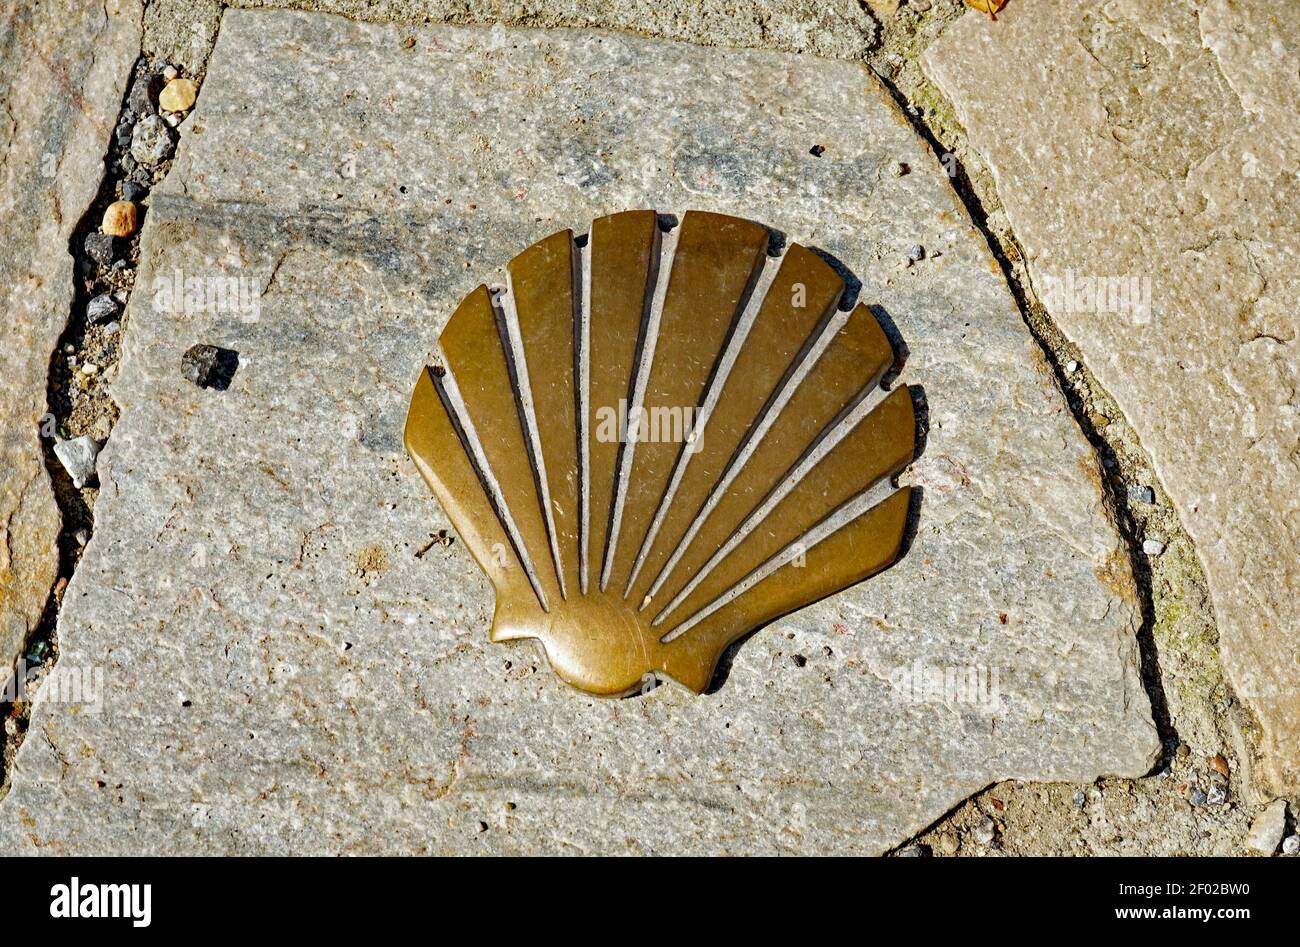 Shell - St. James shell - made of metall as a symbol for the Way of St. James, fixed to stone slabs of the side walk, 2020 Stock Photo